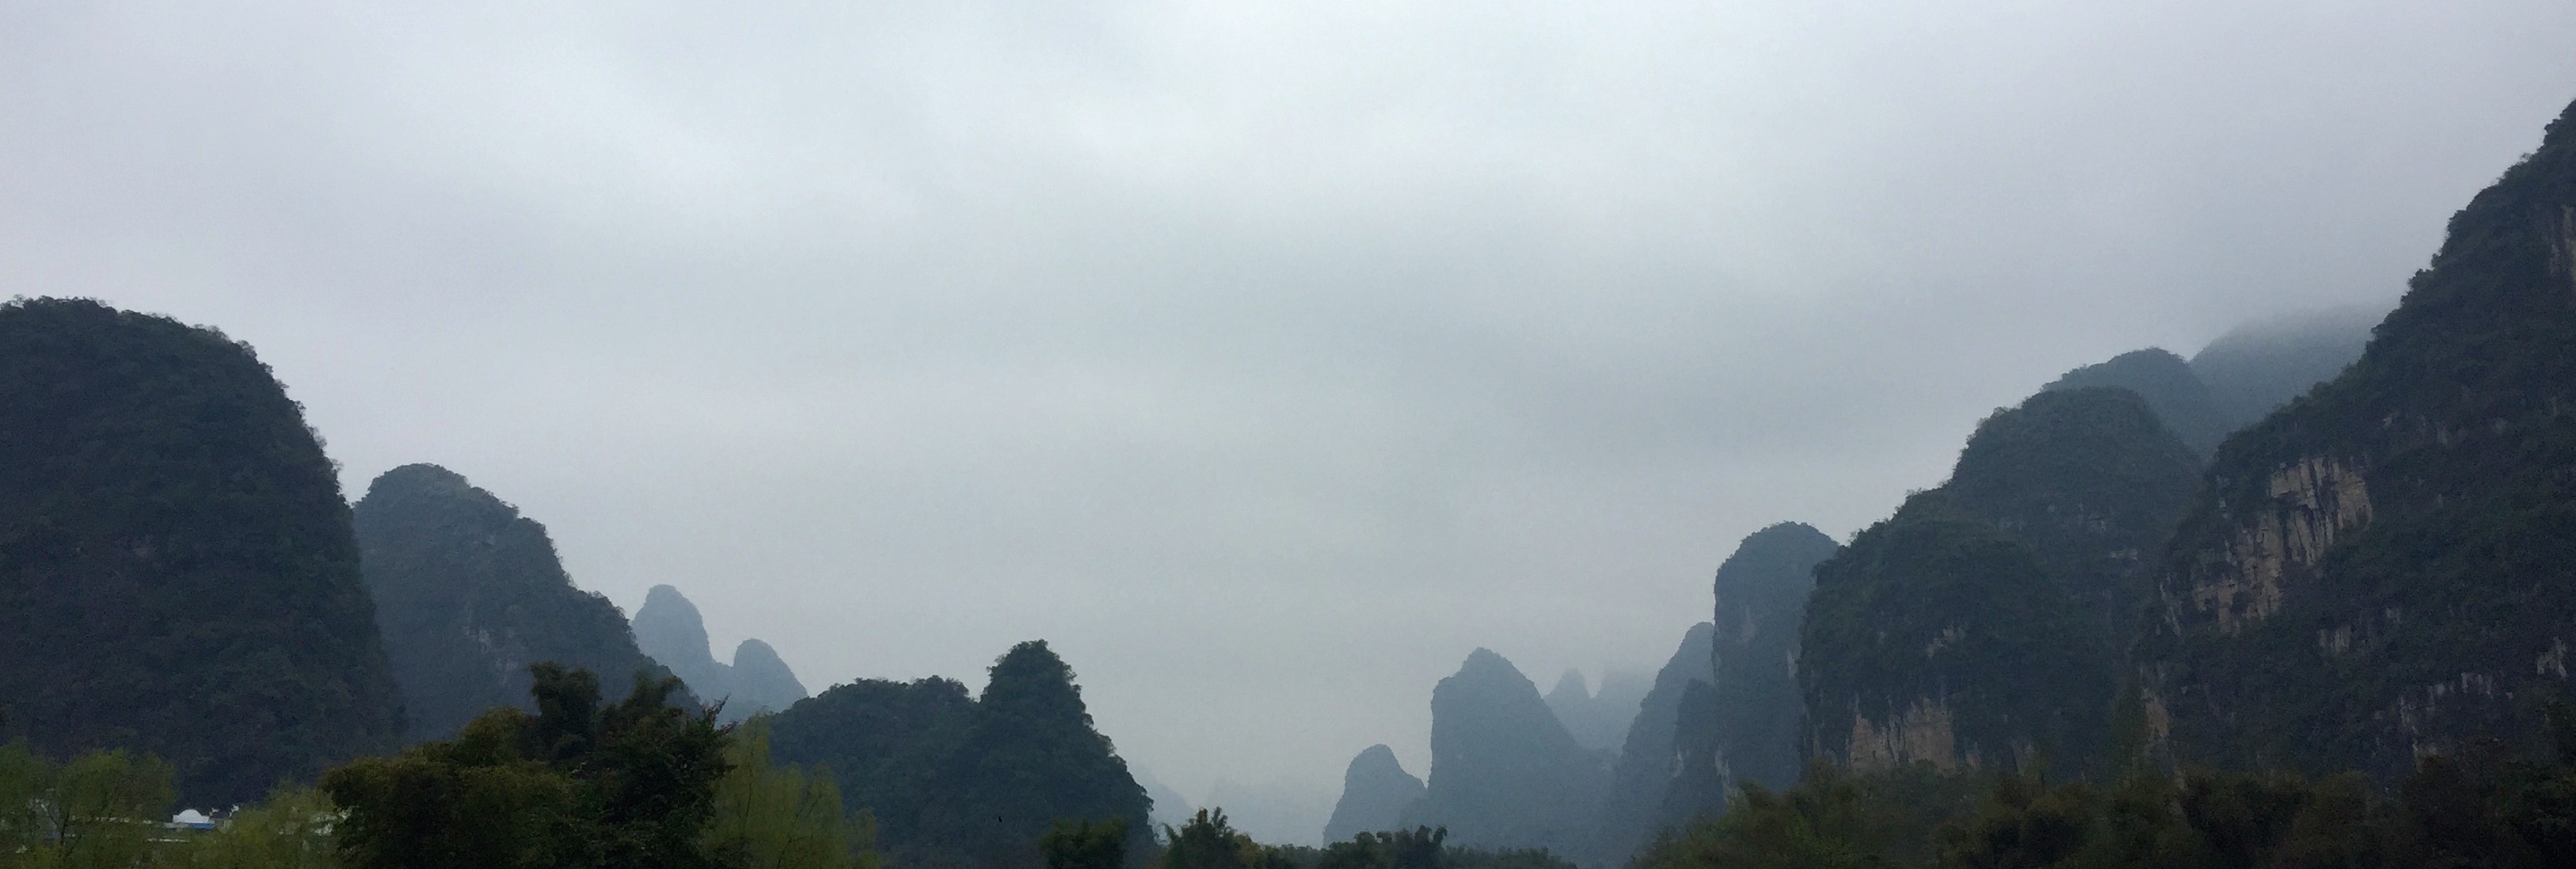 Twilight bike rides and countless other reasons to go to Guilin